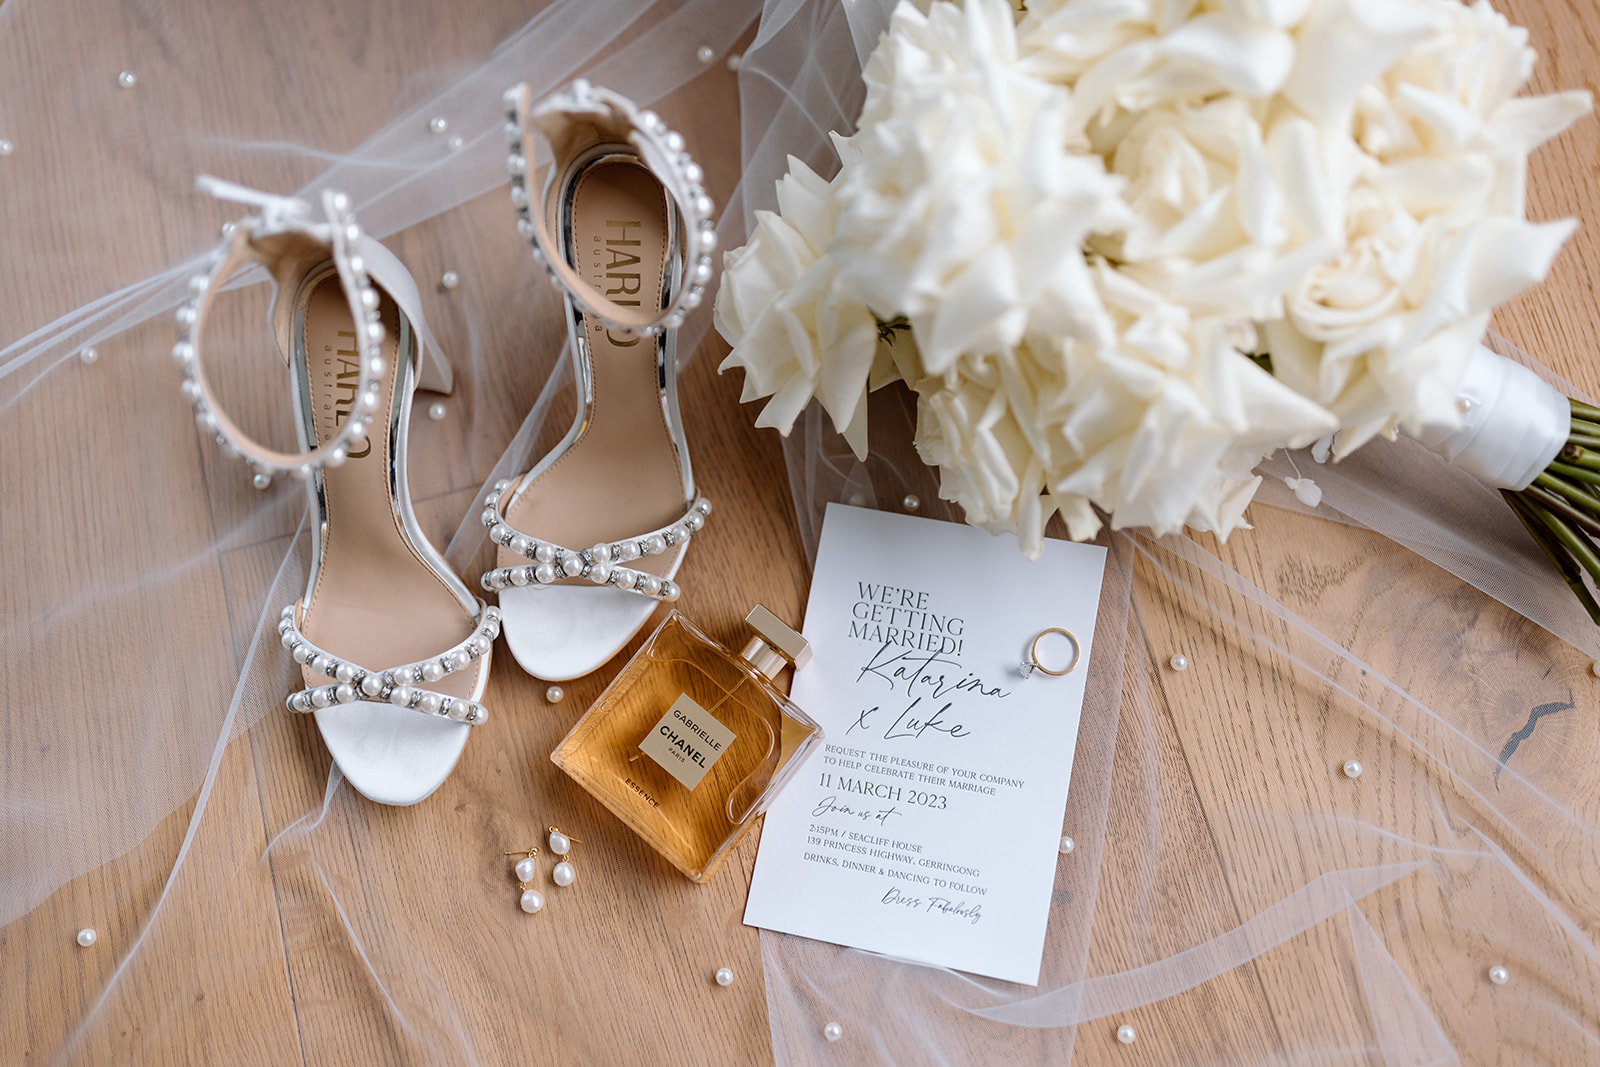 Bridal details at the wedding in the South Coast Seacliff House